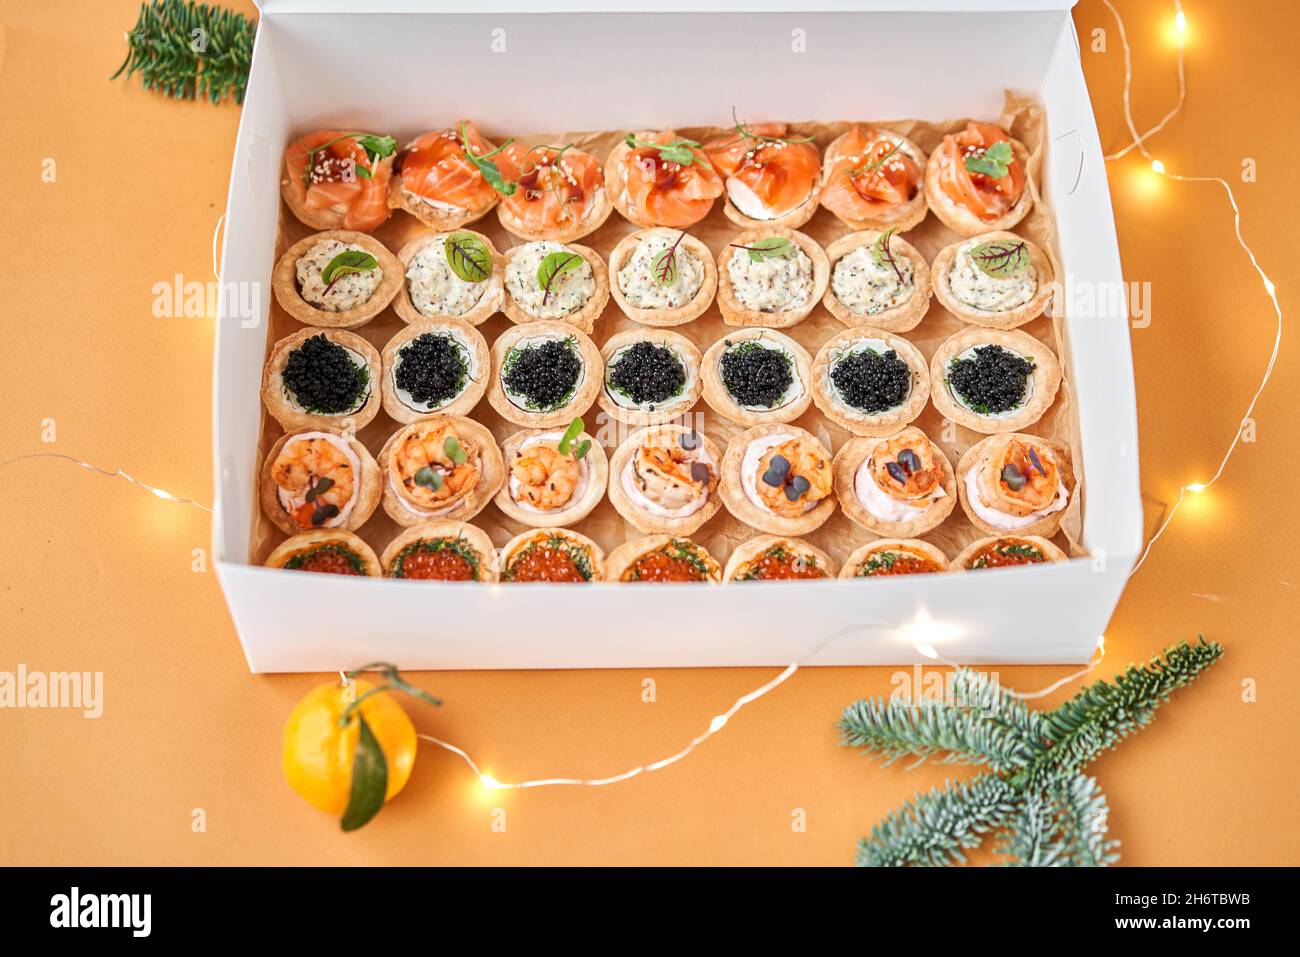 Black and Red caviar with butter in tartlets, crispy shrimps with lemon in sauce in take way box. Menu food for delivery in the Coronavirus Pandemic. Stock Photo